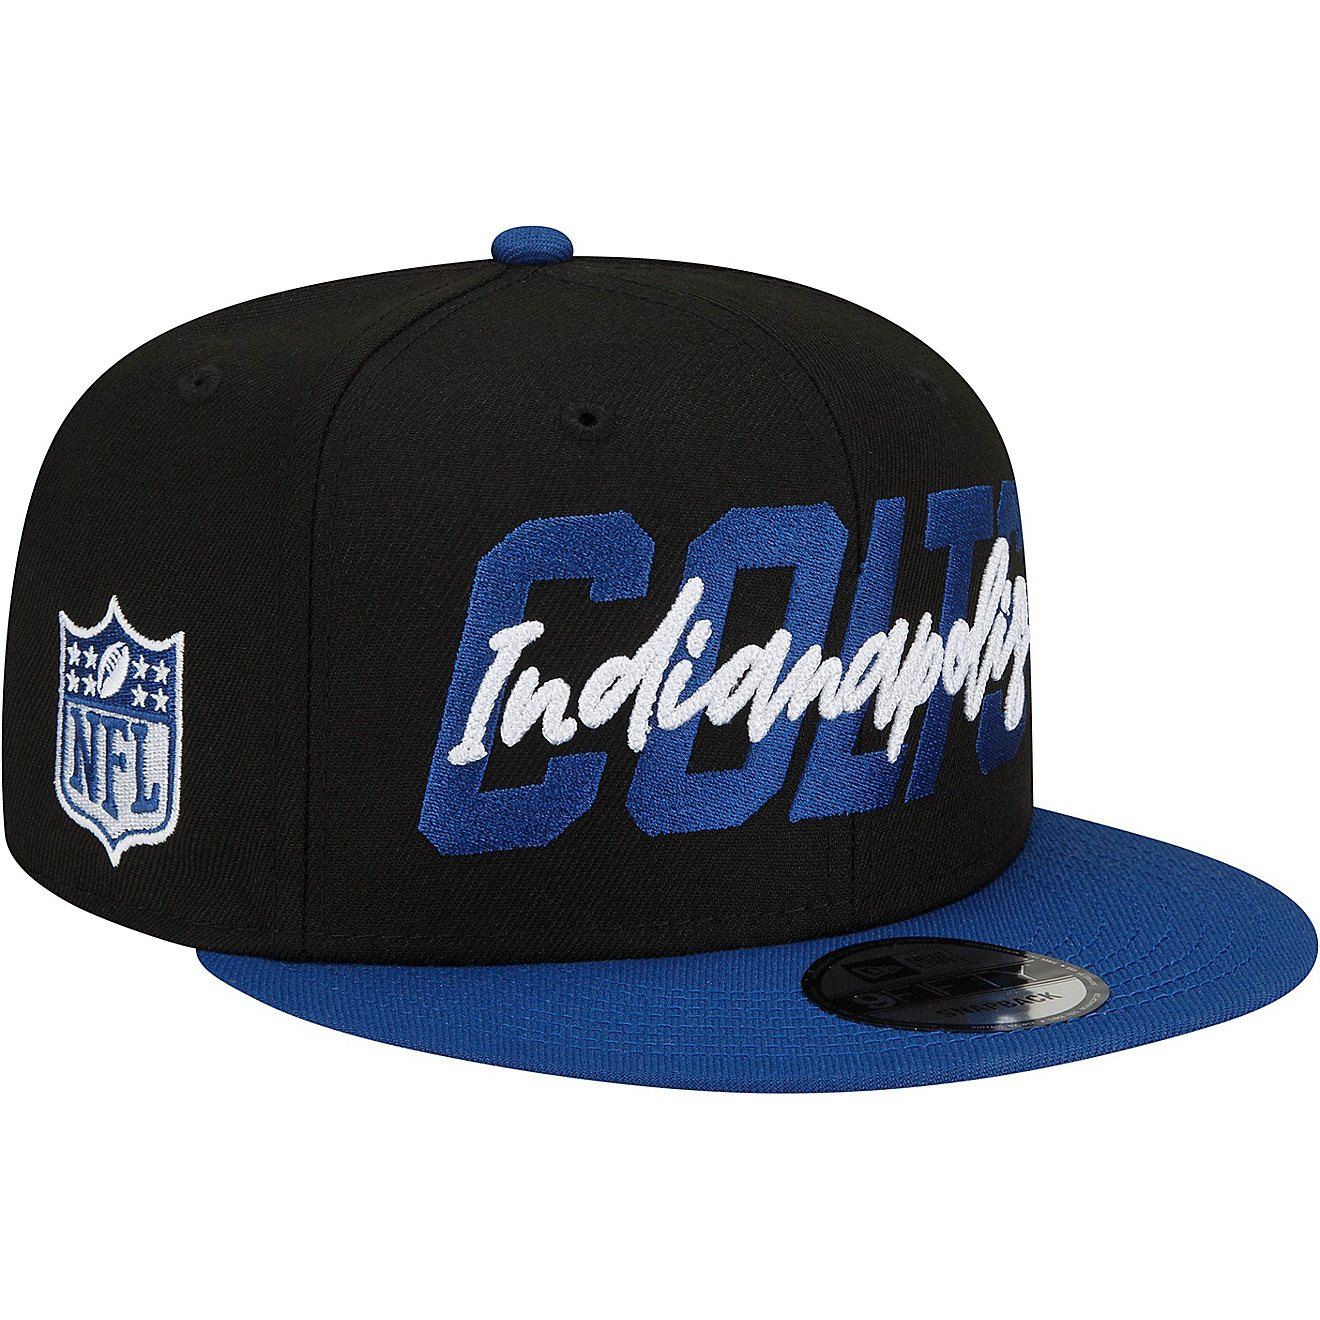 New Era Men's Indianapolis Colts NFL Draft 22 9FIFTY Cap                                                                         - view number 3